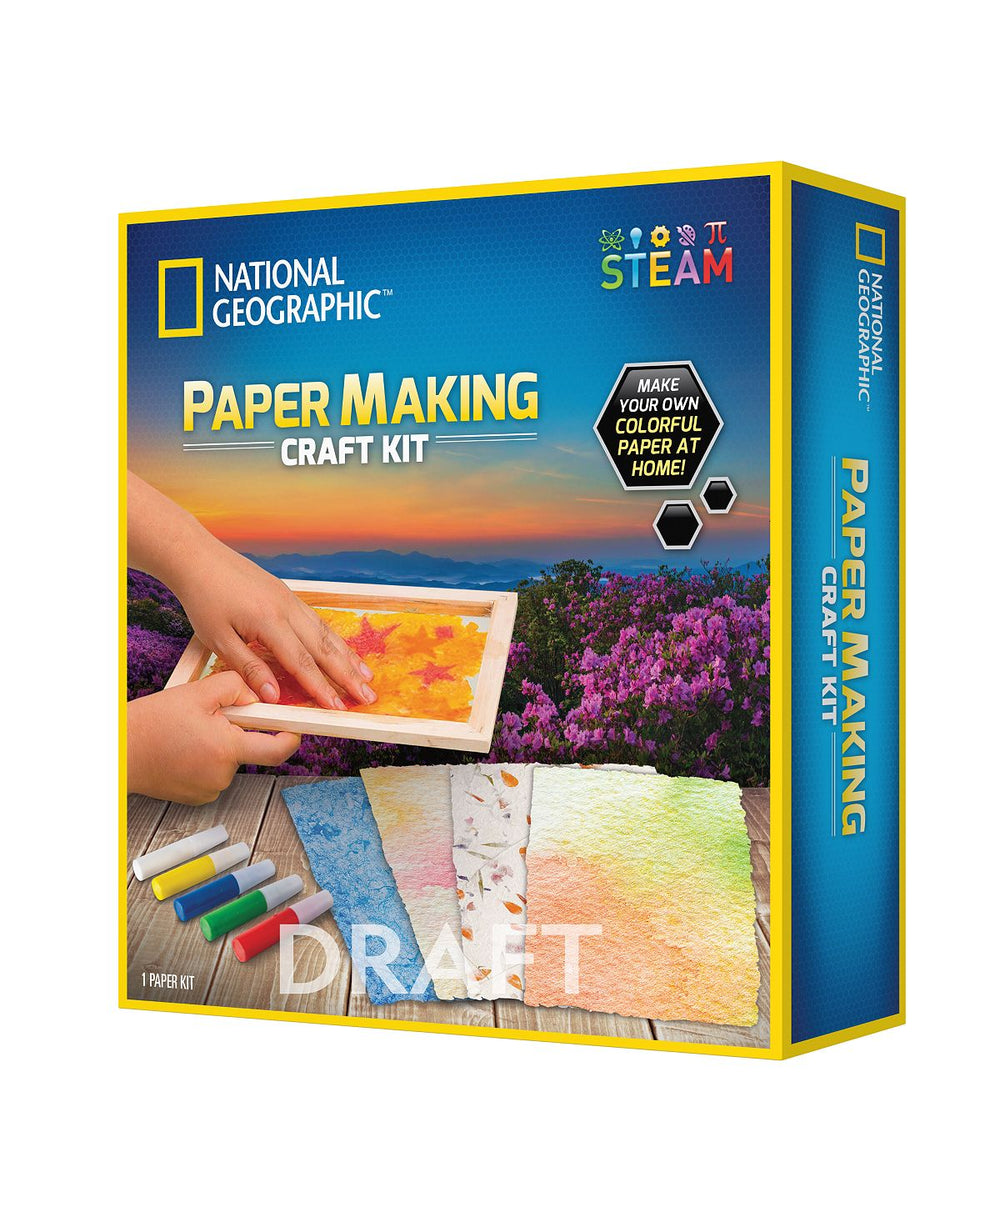 National Geographic STEAM Paper Making Craft Kit - Colorful Creation Set